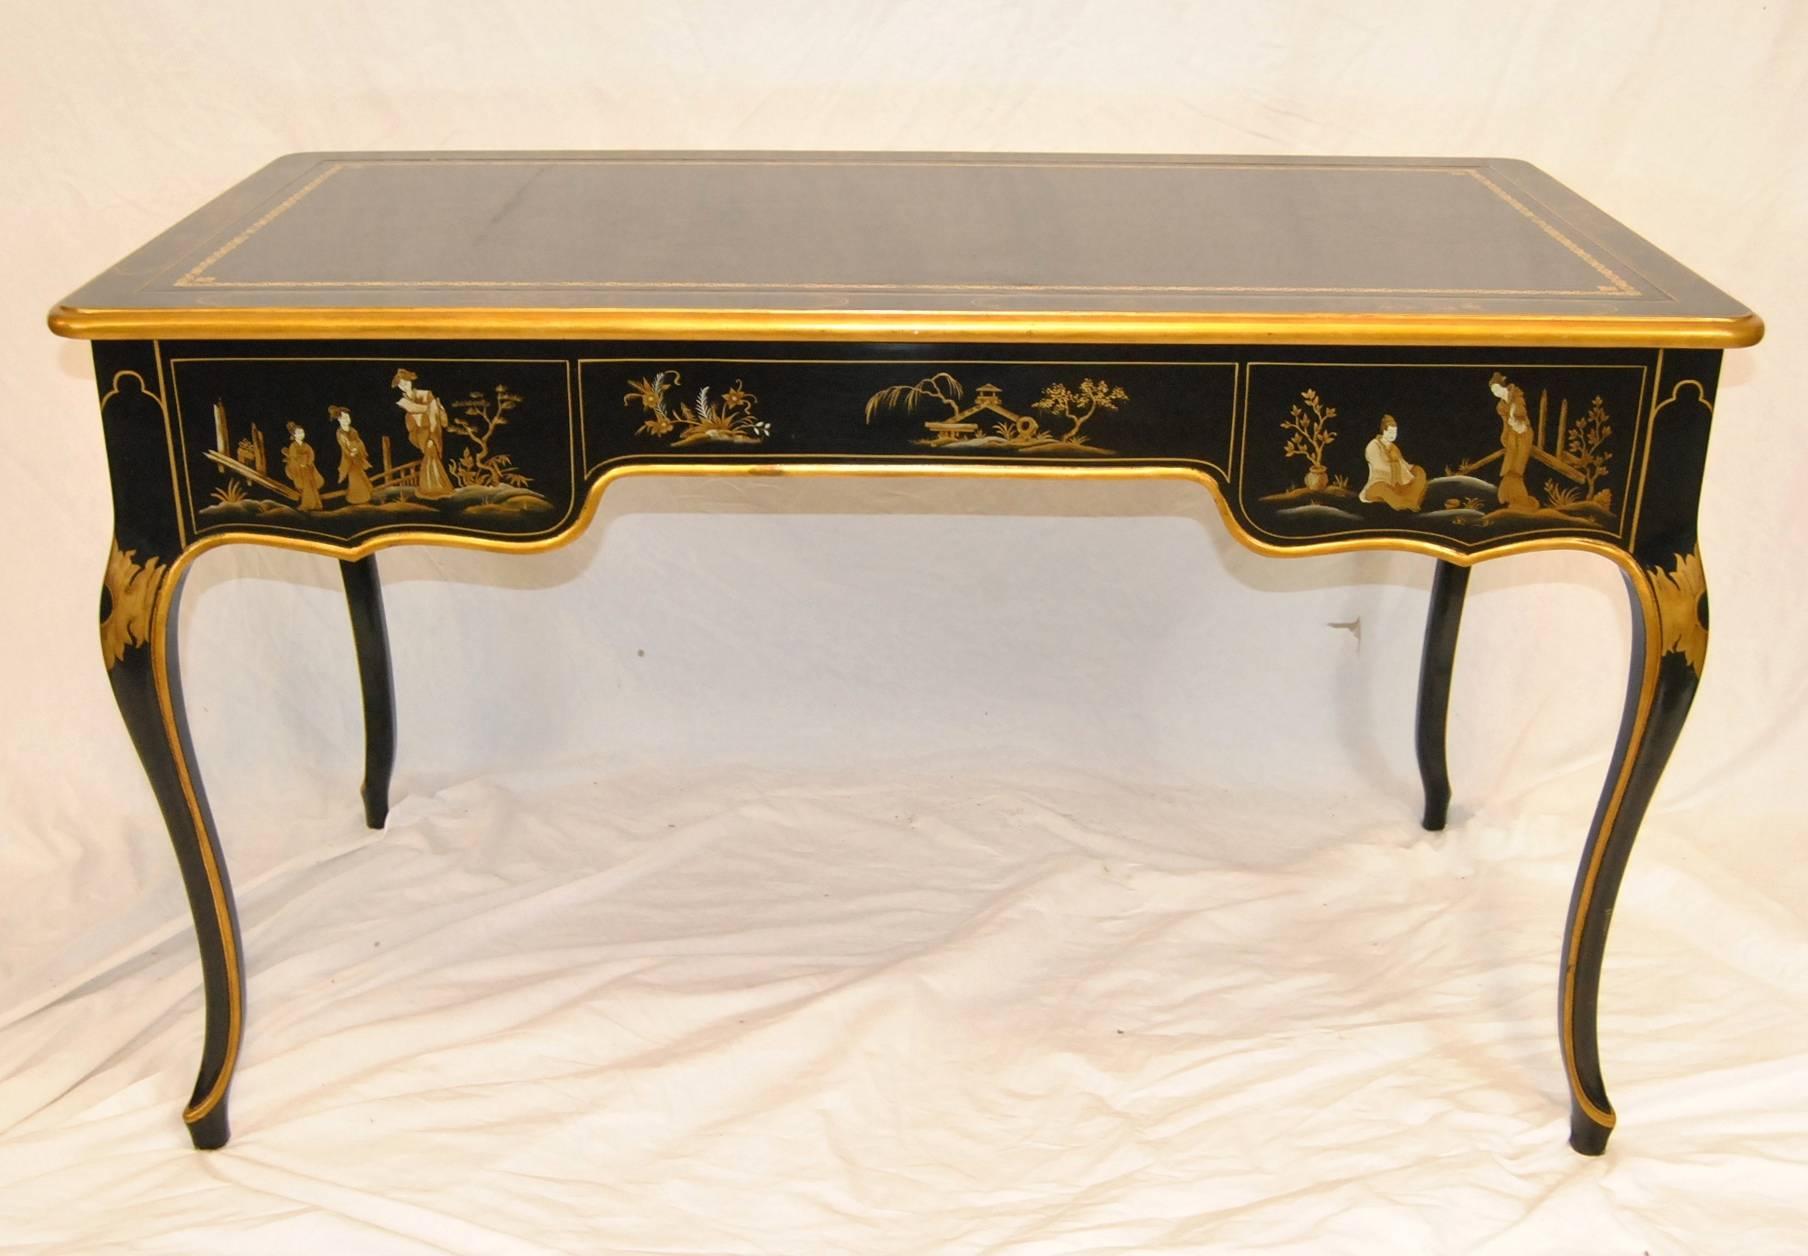 A stunning black lacquered chinoiserie writing desk by Baker Furniture. This desk is part of their Classic Collection. The desk is finished on all four sides for use centrally in your room. It features three dovetailed drawers with brass hardware.